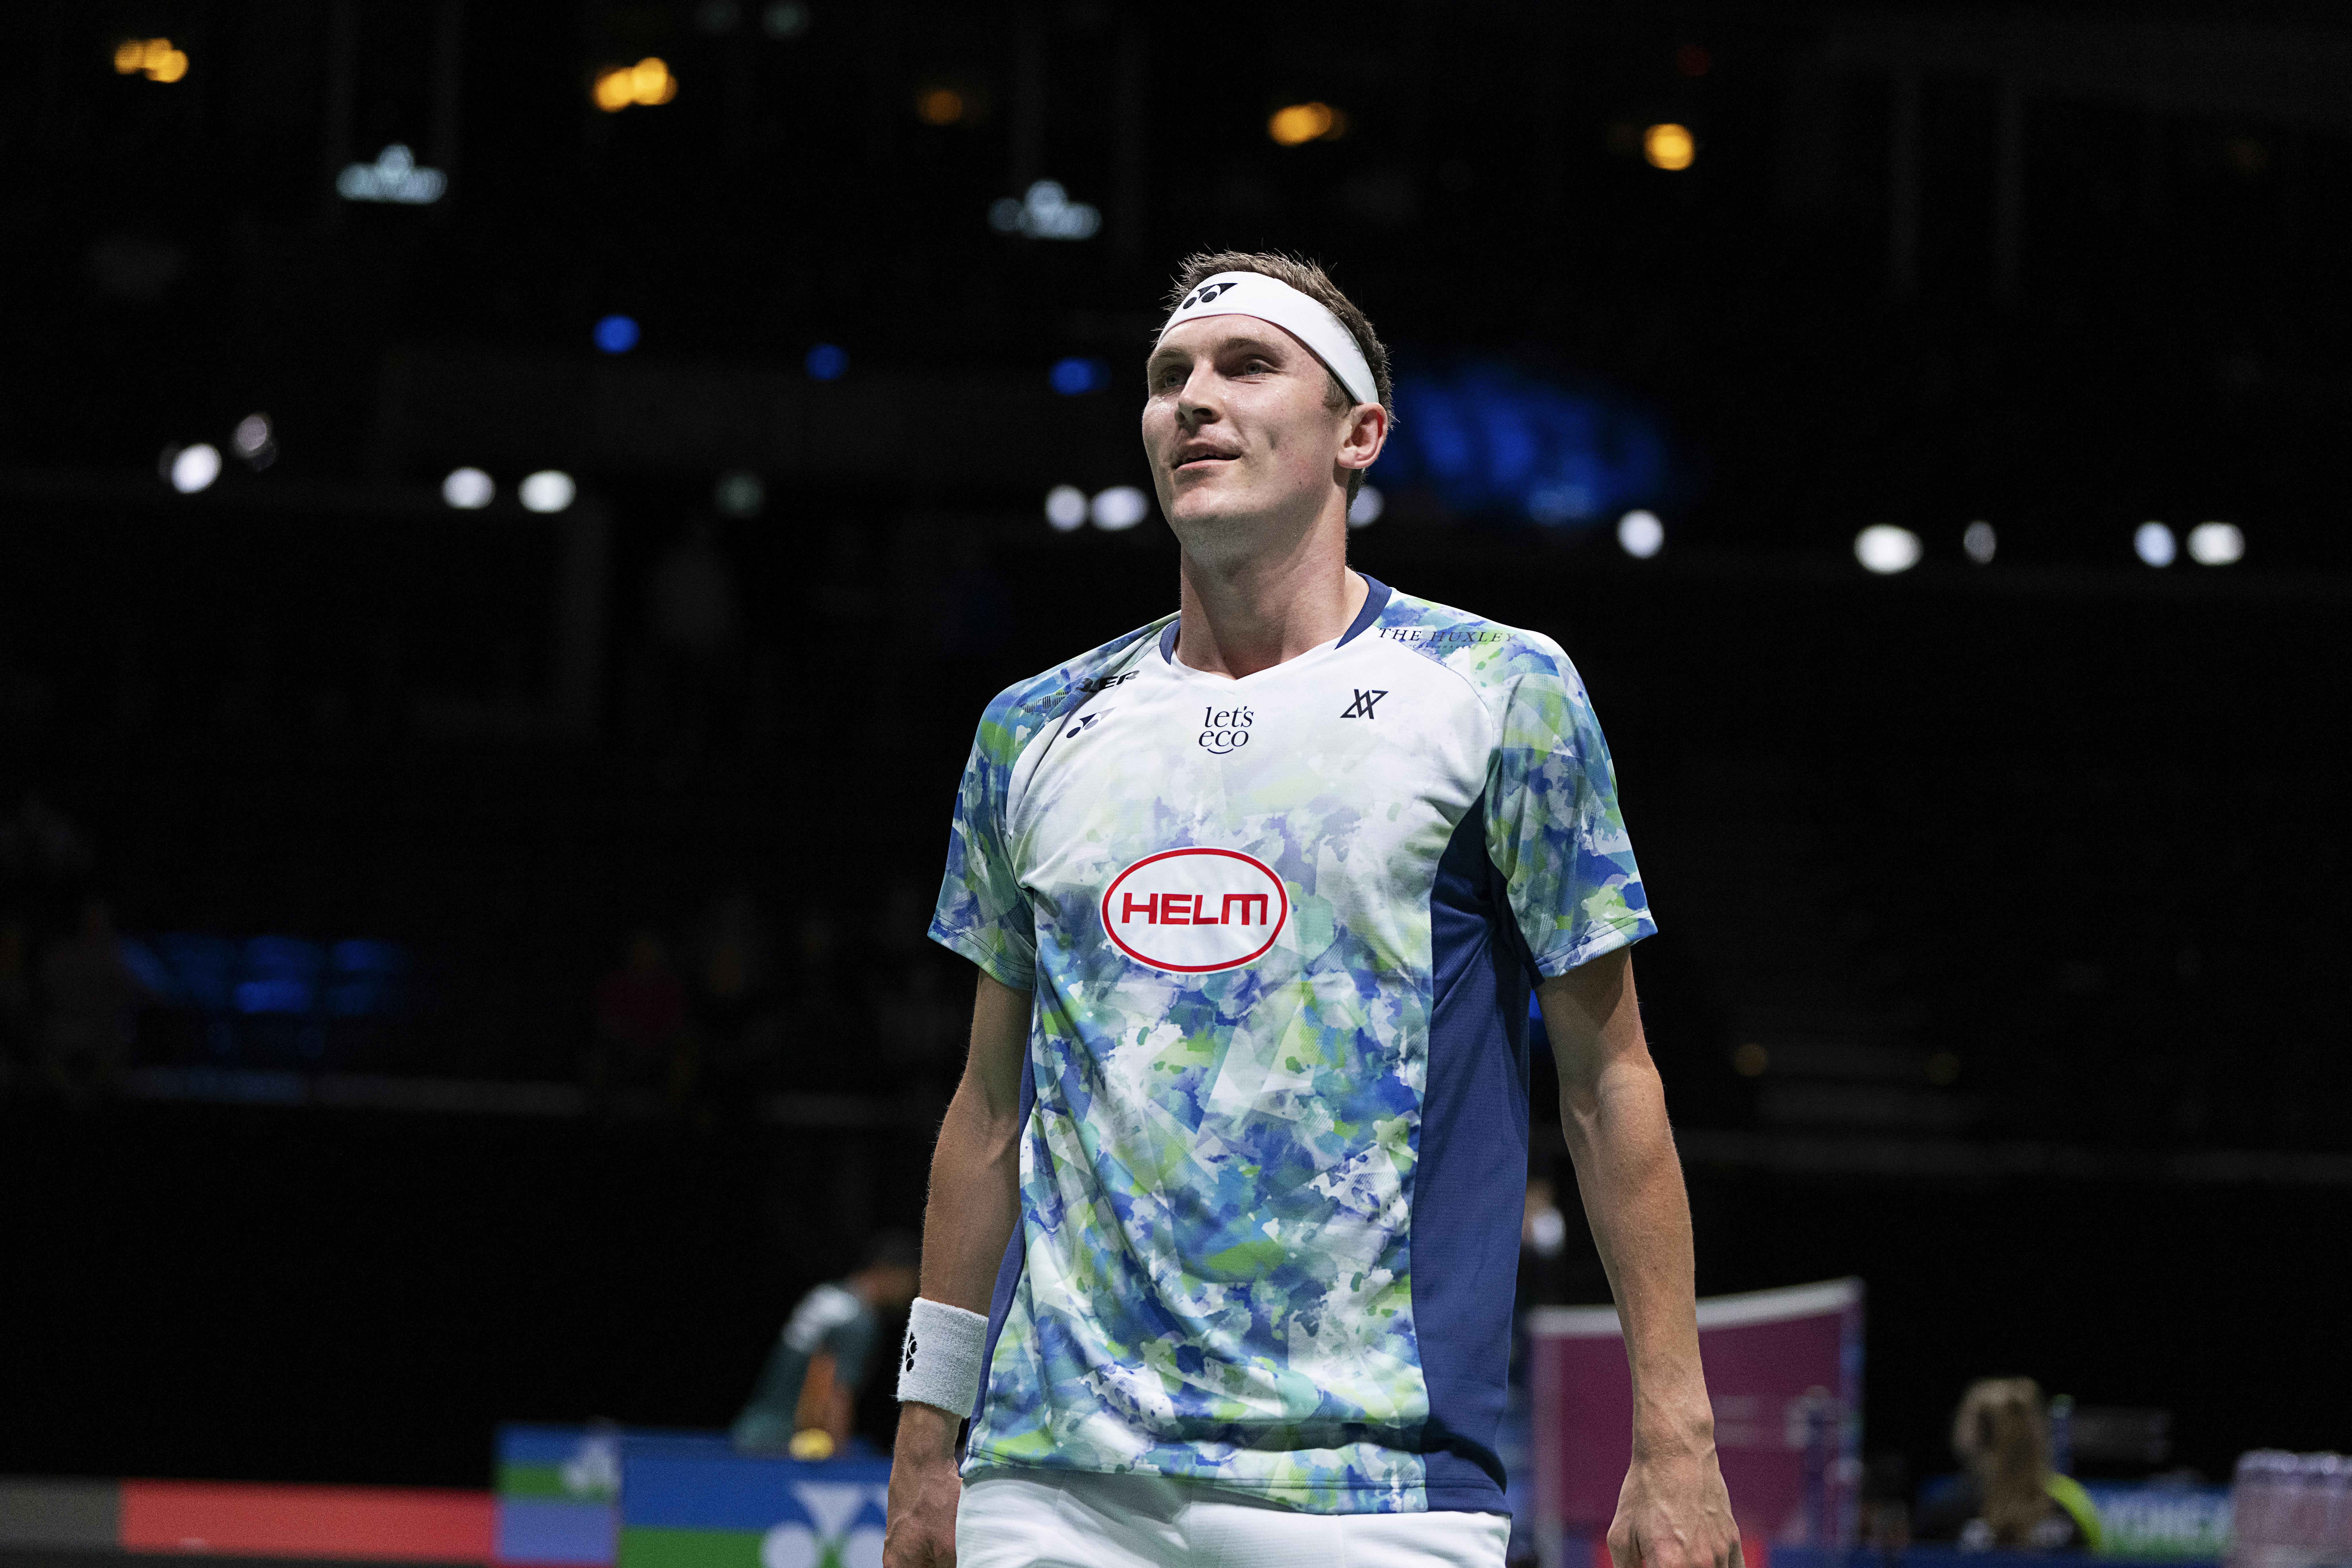 Viktor Axelsen of Denmark during his 1. round mens single match against Christo Popov of France at the BWF World Championship in Royal Arena in Copenhagen, Denmark, Tuesday August 22, 2023. (Foto: Claus Bech/Scanpix 2023)